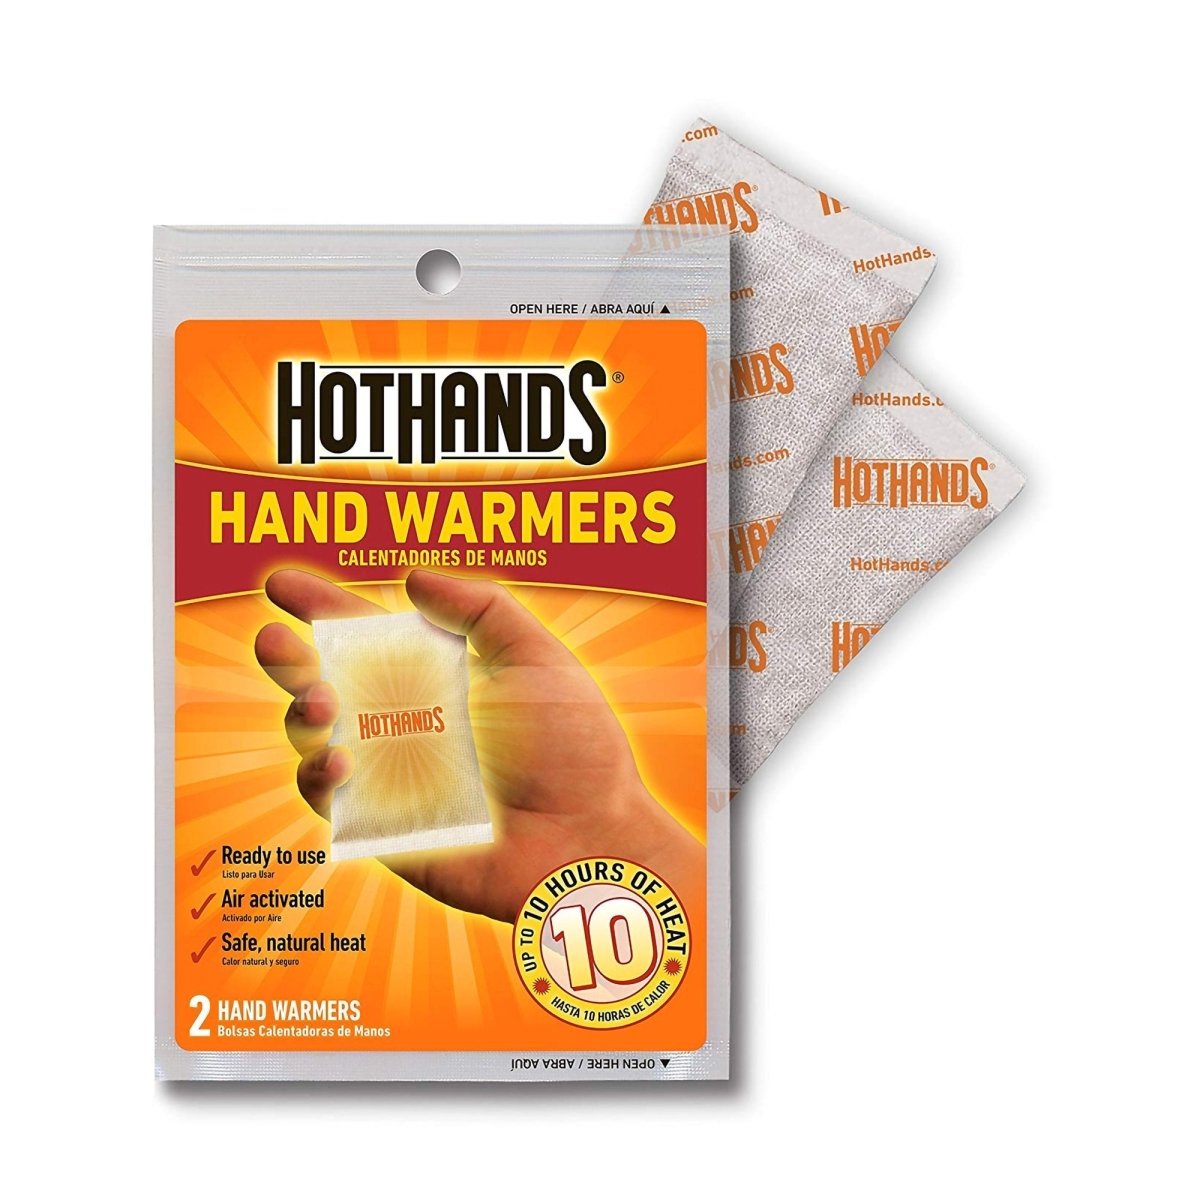 Hothands-2 Instant Chemical Activation Hot Packs - 575821_BX - 1